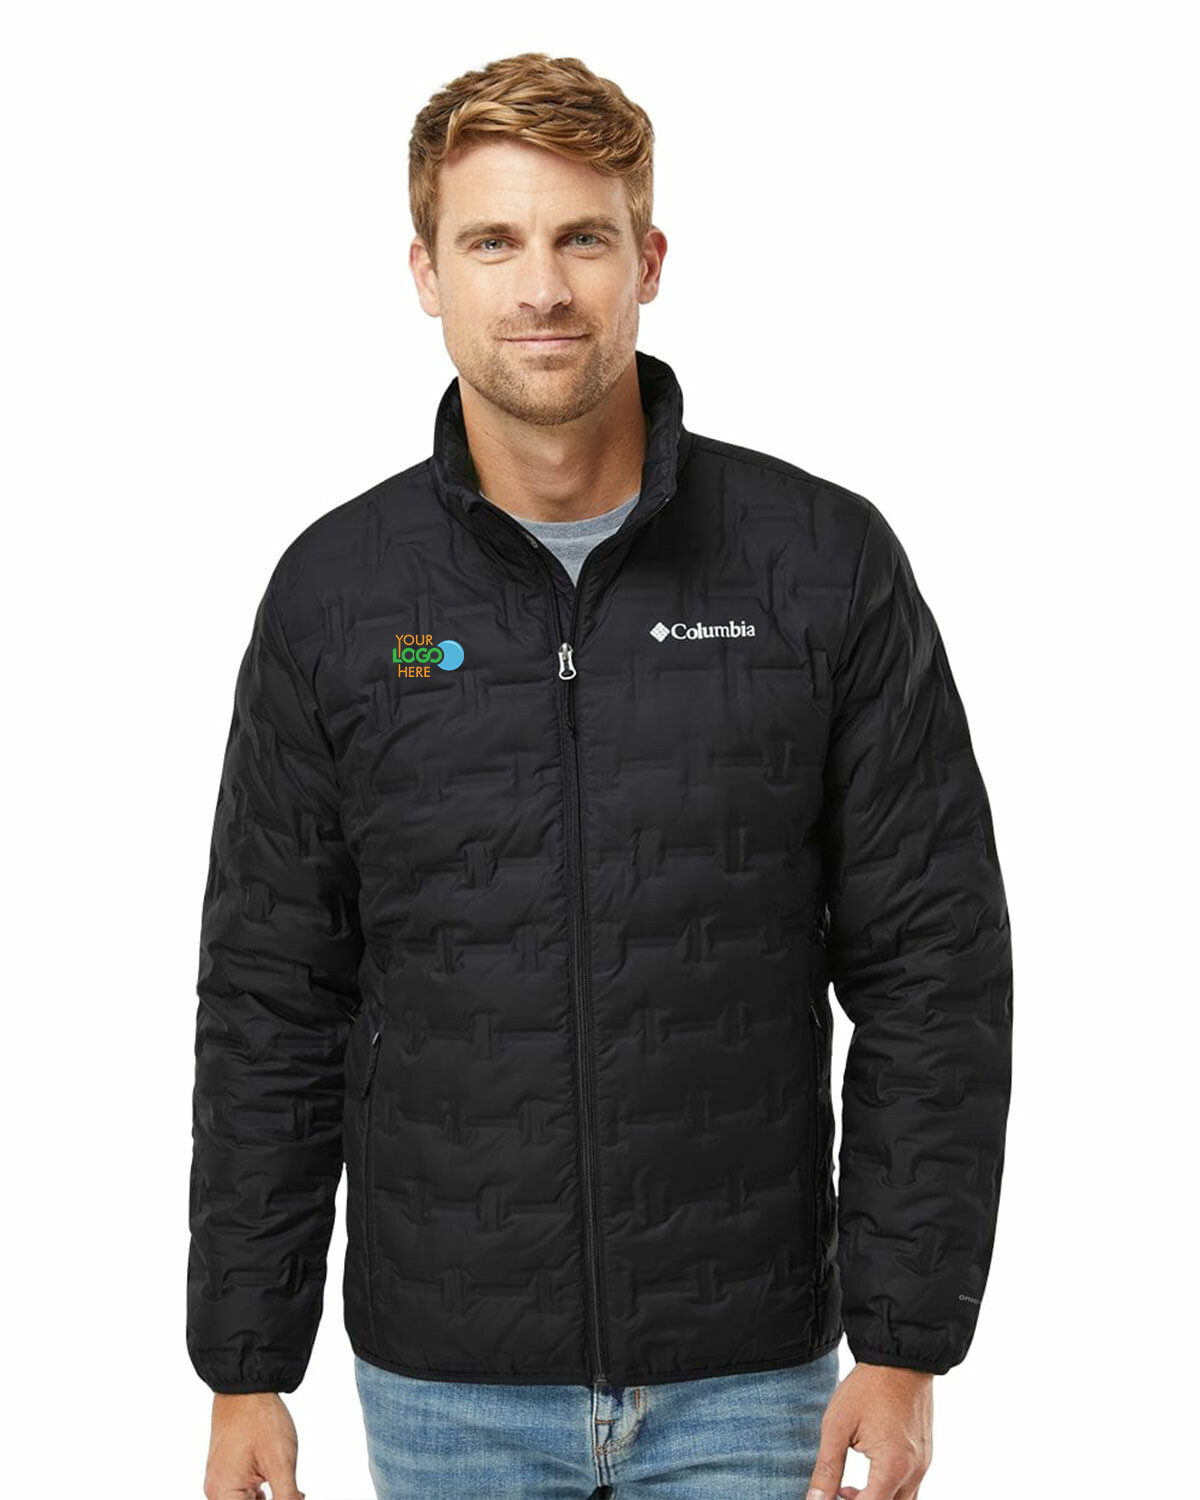 Custom Columbia 187590 Delta Ridge Down Jacket for business Apparel, promotional Product